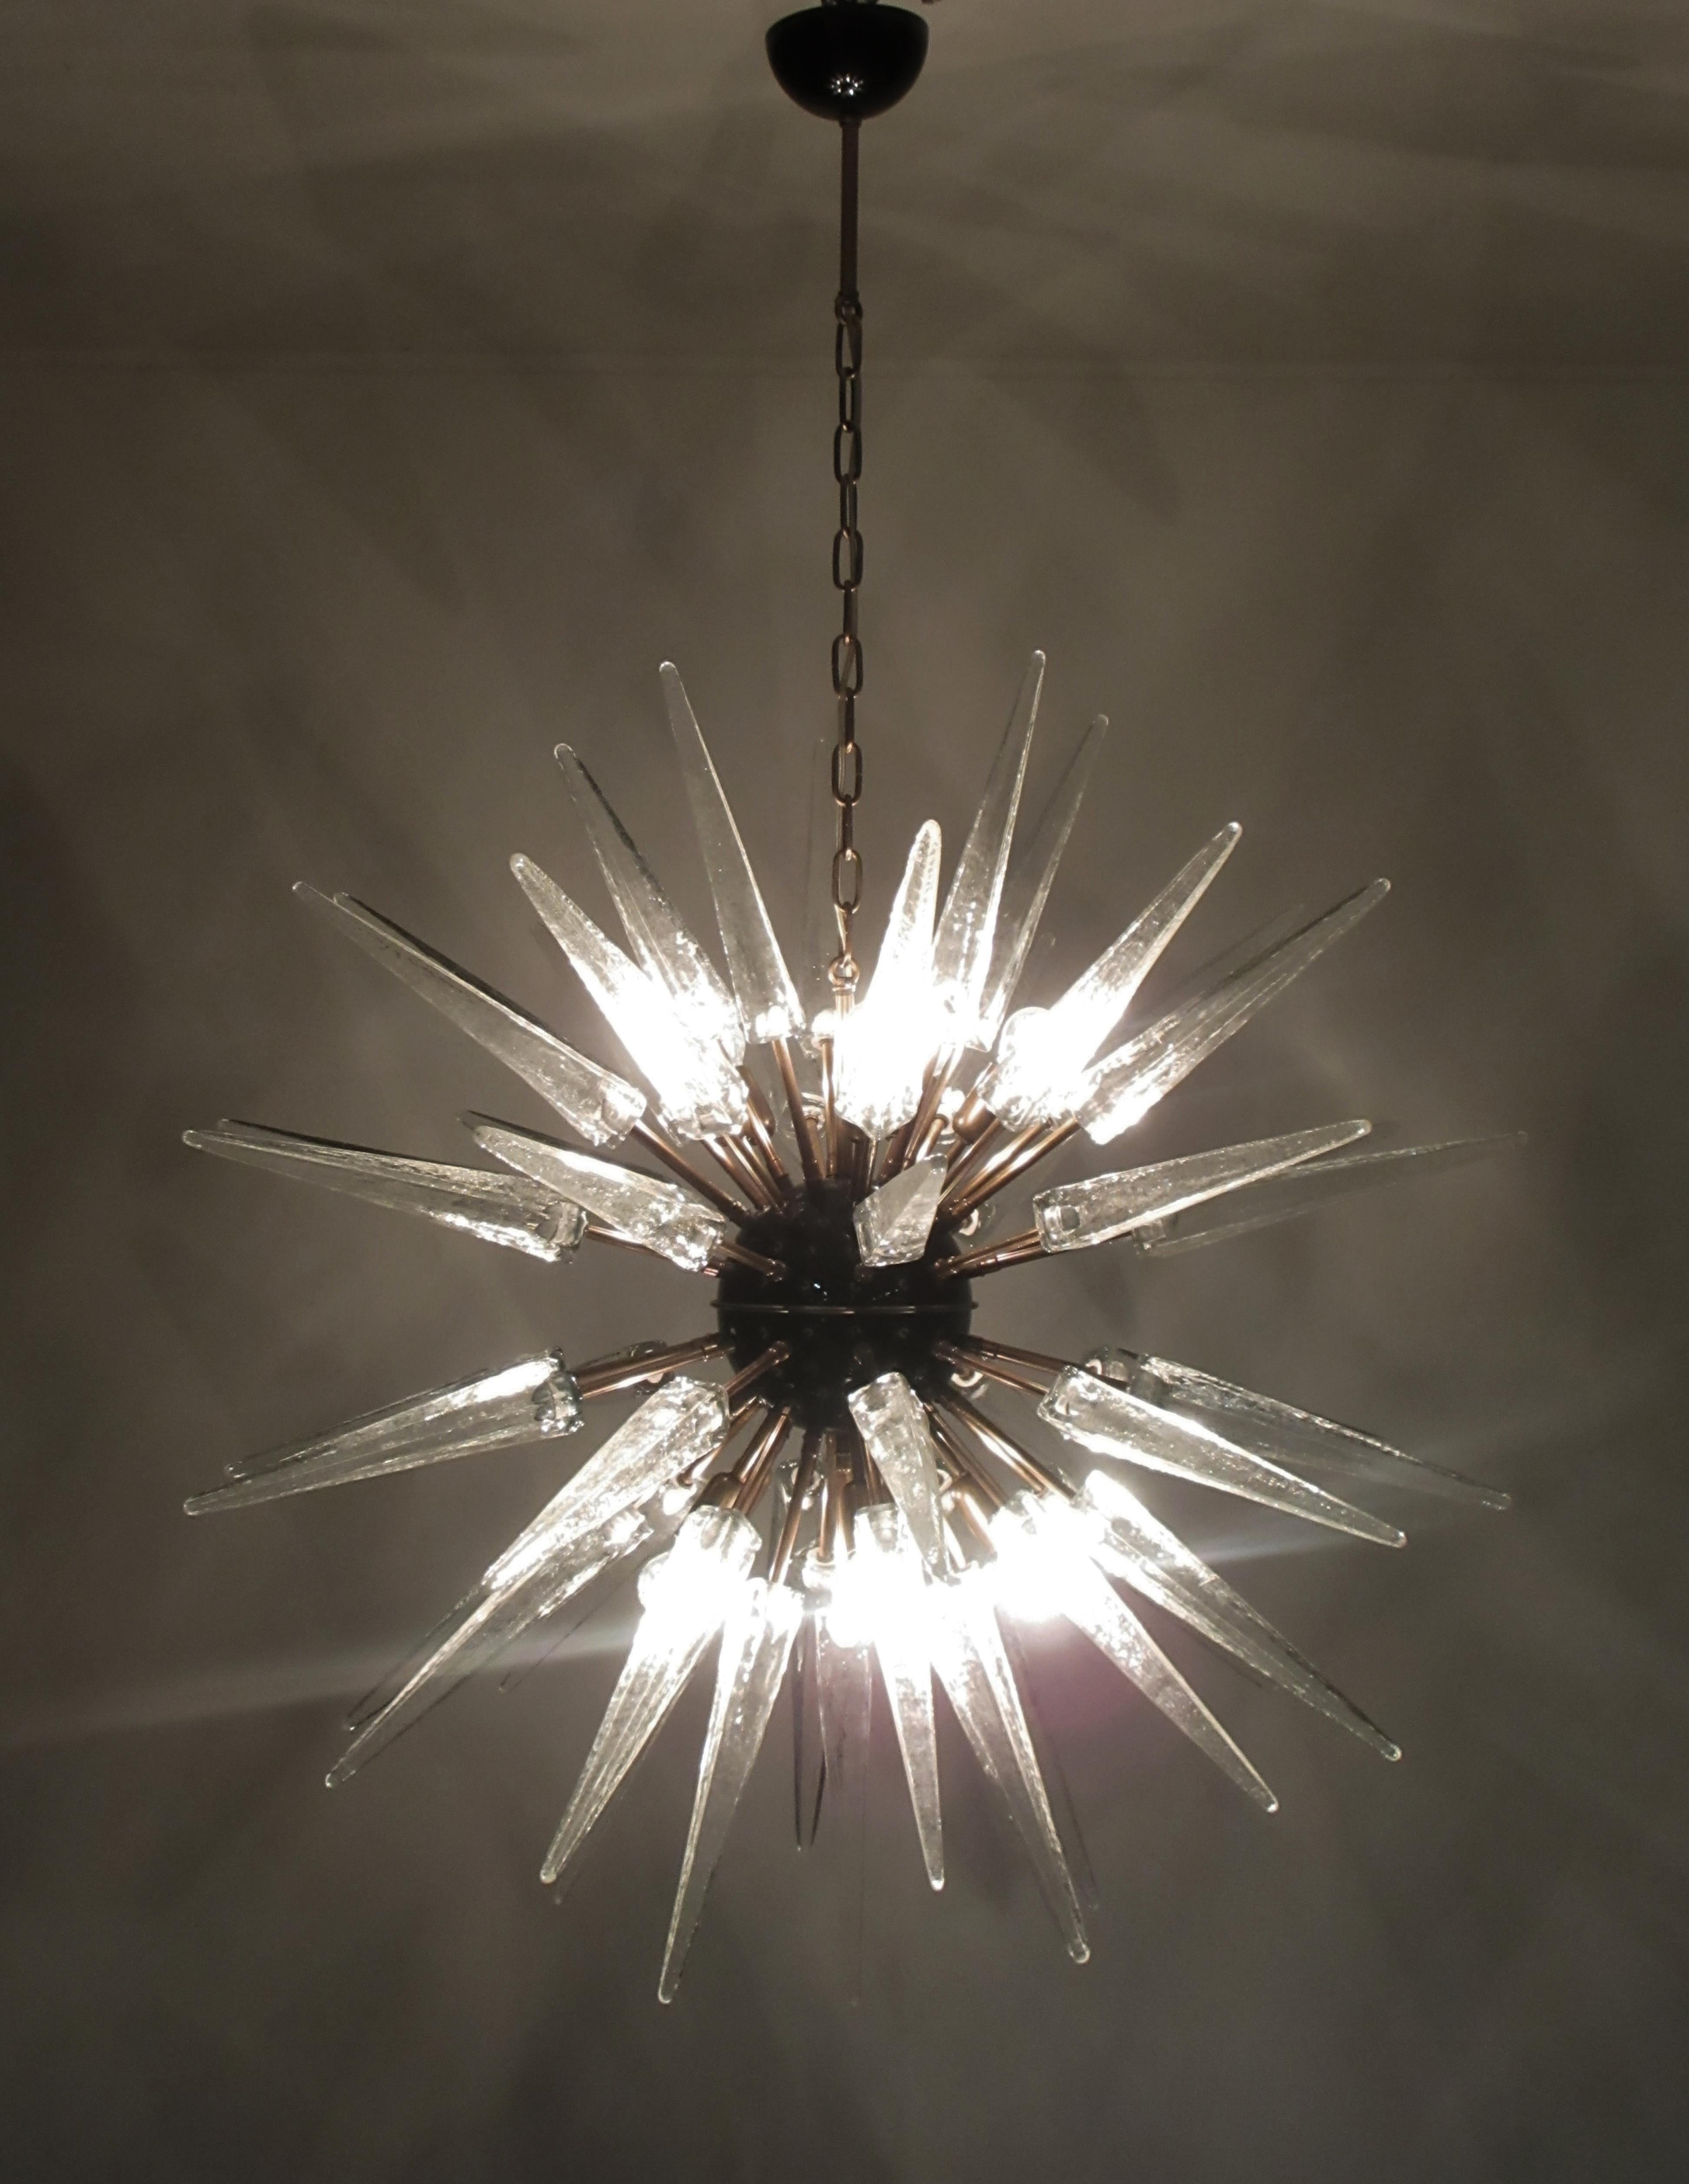 Italian Sputnik chandelier in a black and brass metal, 51 unobtainable transparent glass tips. Murano blown glass in a traditional way. 10-light points.
Period: Late 20th century
Dimensions: 55.10 inches (140 cm) height with chain, 37.40 inches